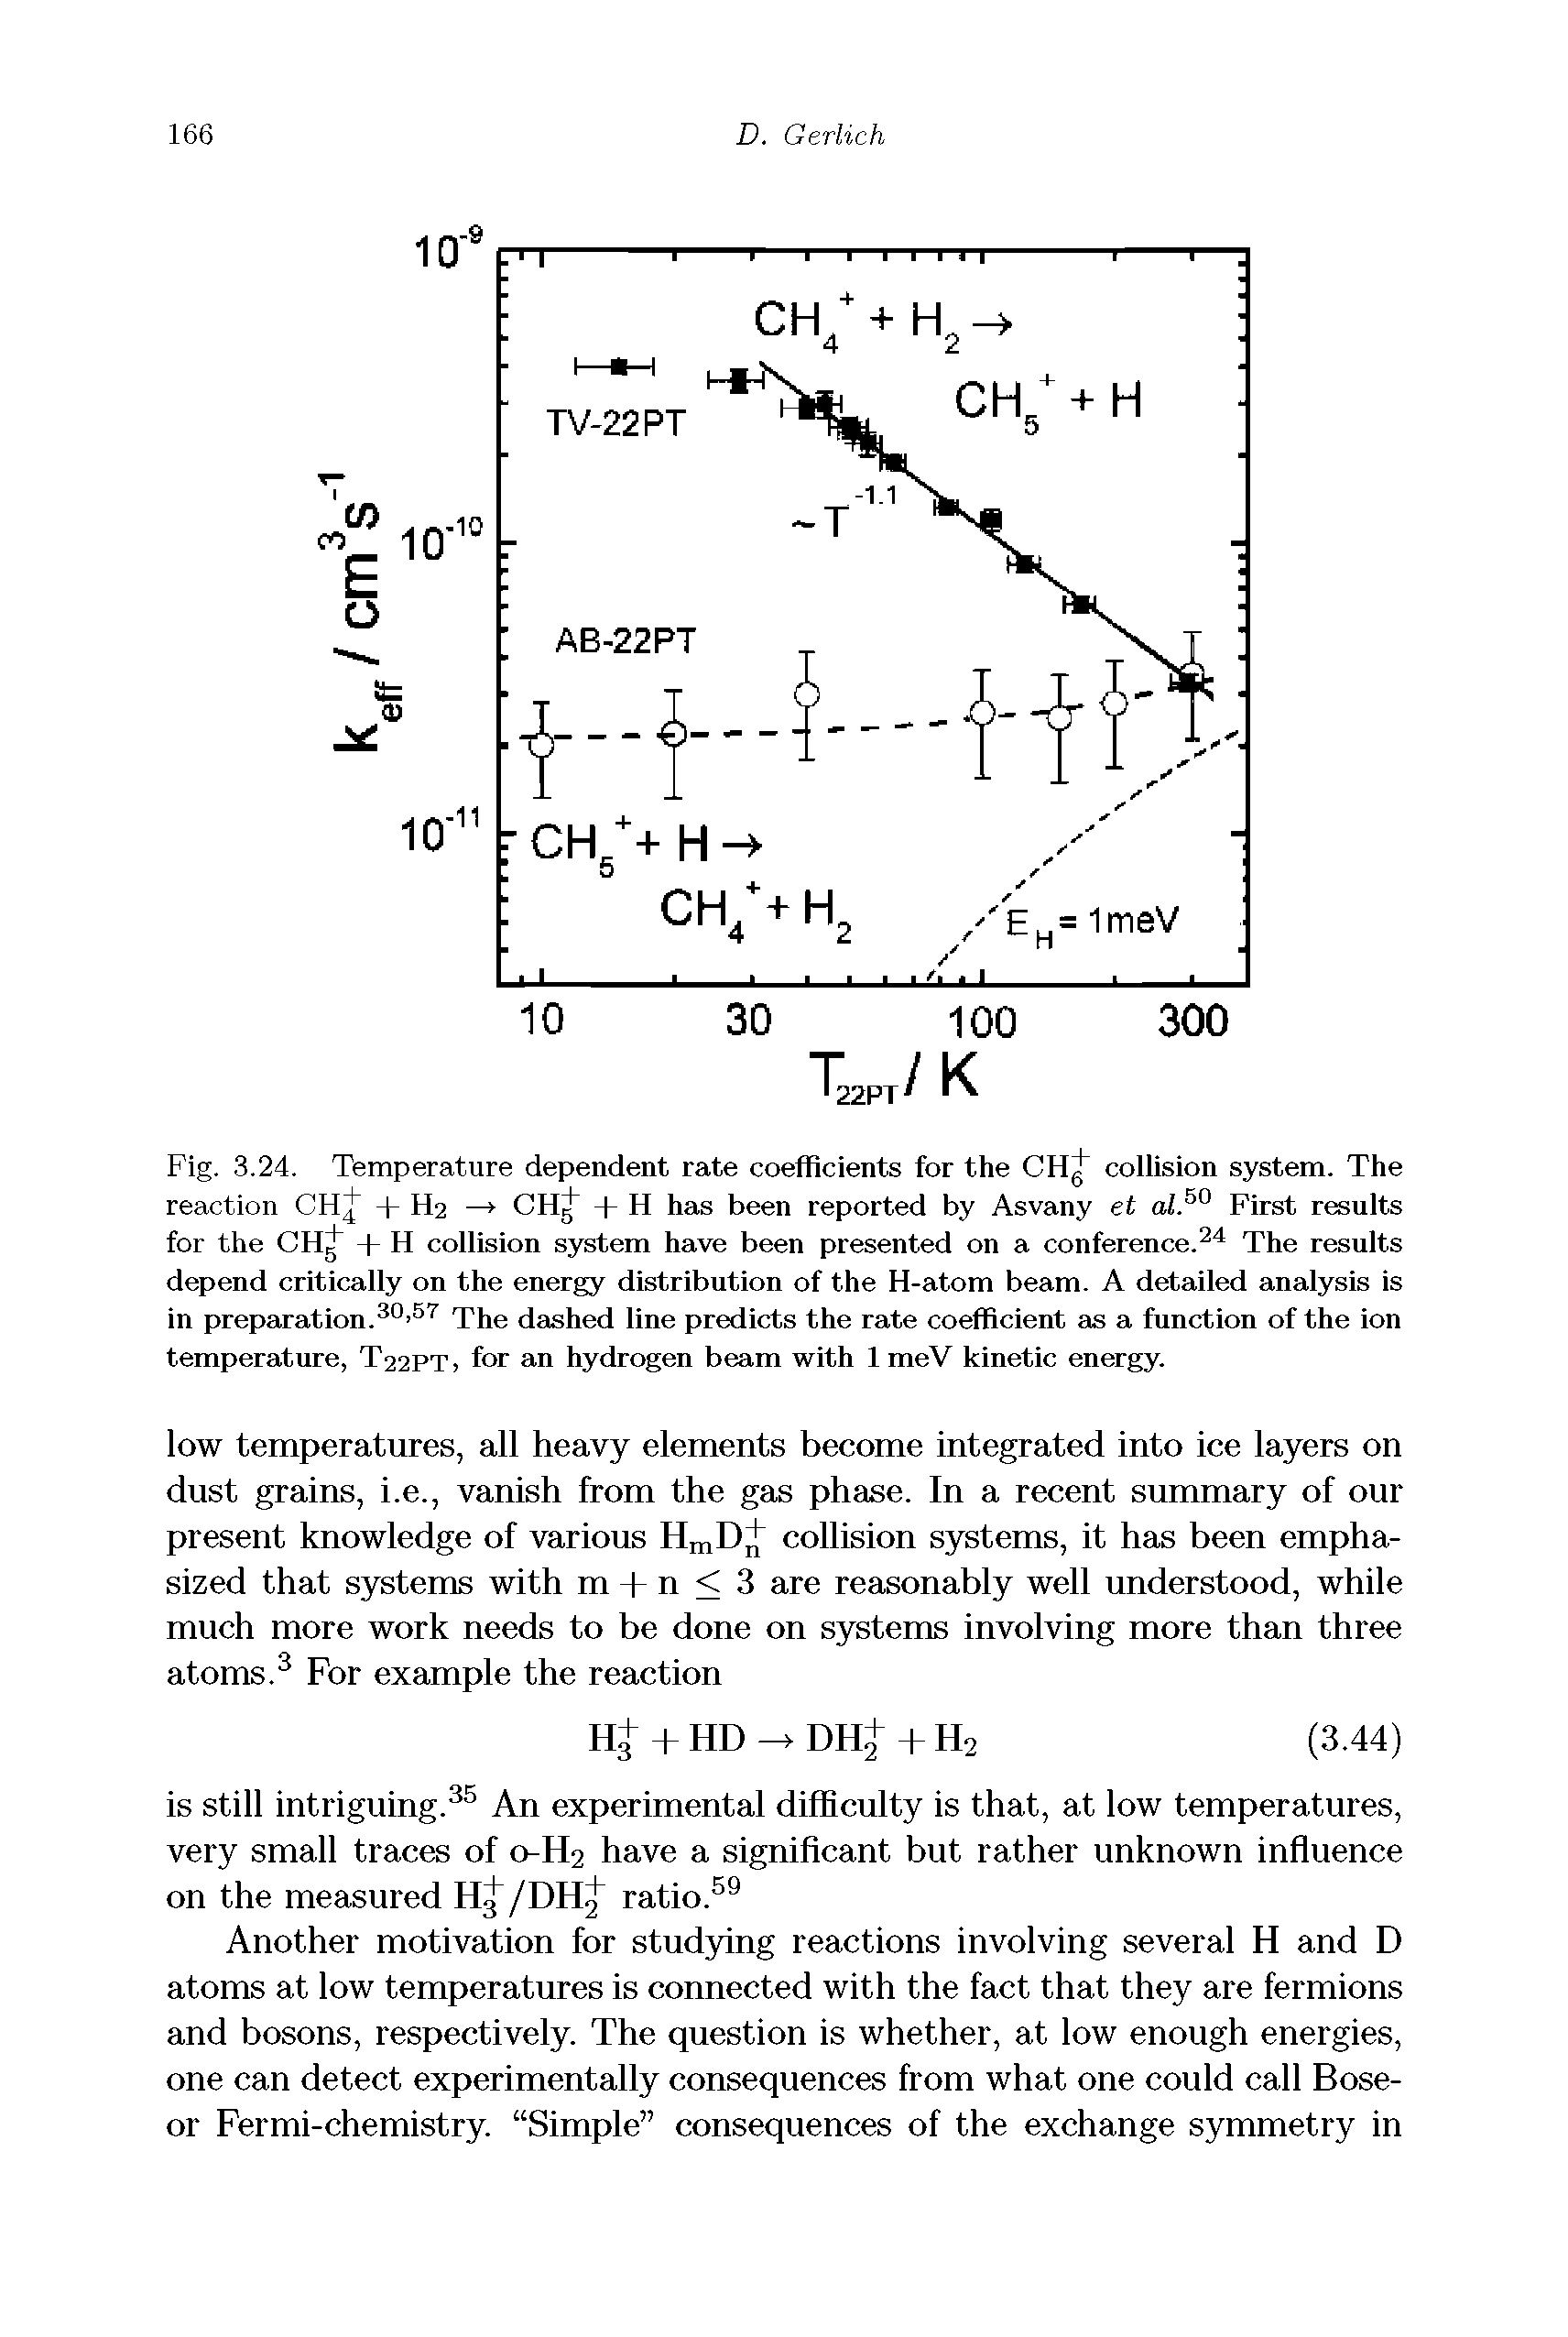 Fig. 3.24. Temperature dependent rate coefficients for the CHJ collision system. The reaction CHJ + H2 — CH + H has been reported by Asvany et ol. First results for the CH + H collision system have been presented on a conference. " The results depend critically on the energy distribution of the H-atom beam. A detailed analysis is in preparation. The dashed line predicts the rate coefficient as a function of the ion temperature, T22PT > for an hydrogen beam with 1 meV kinetic energy.